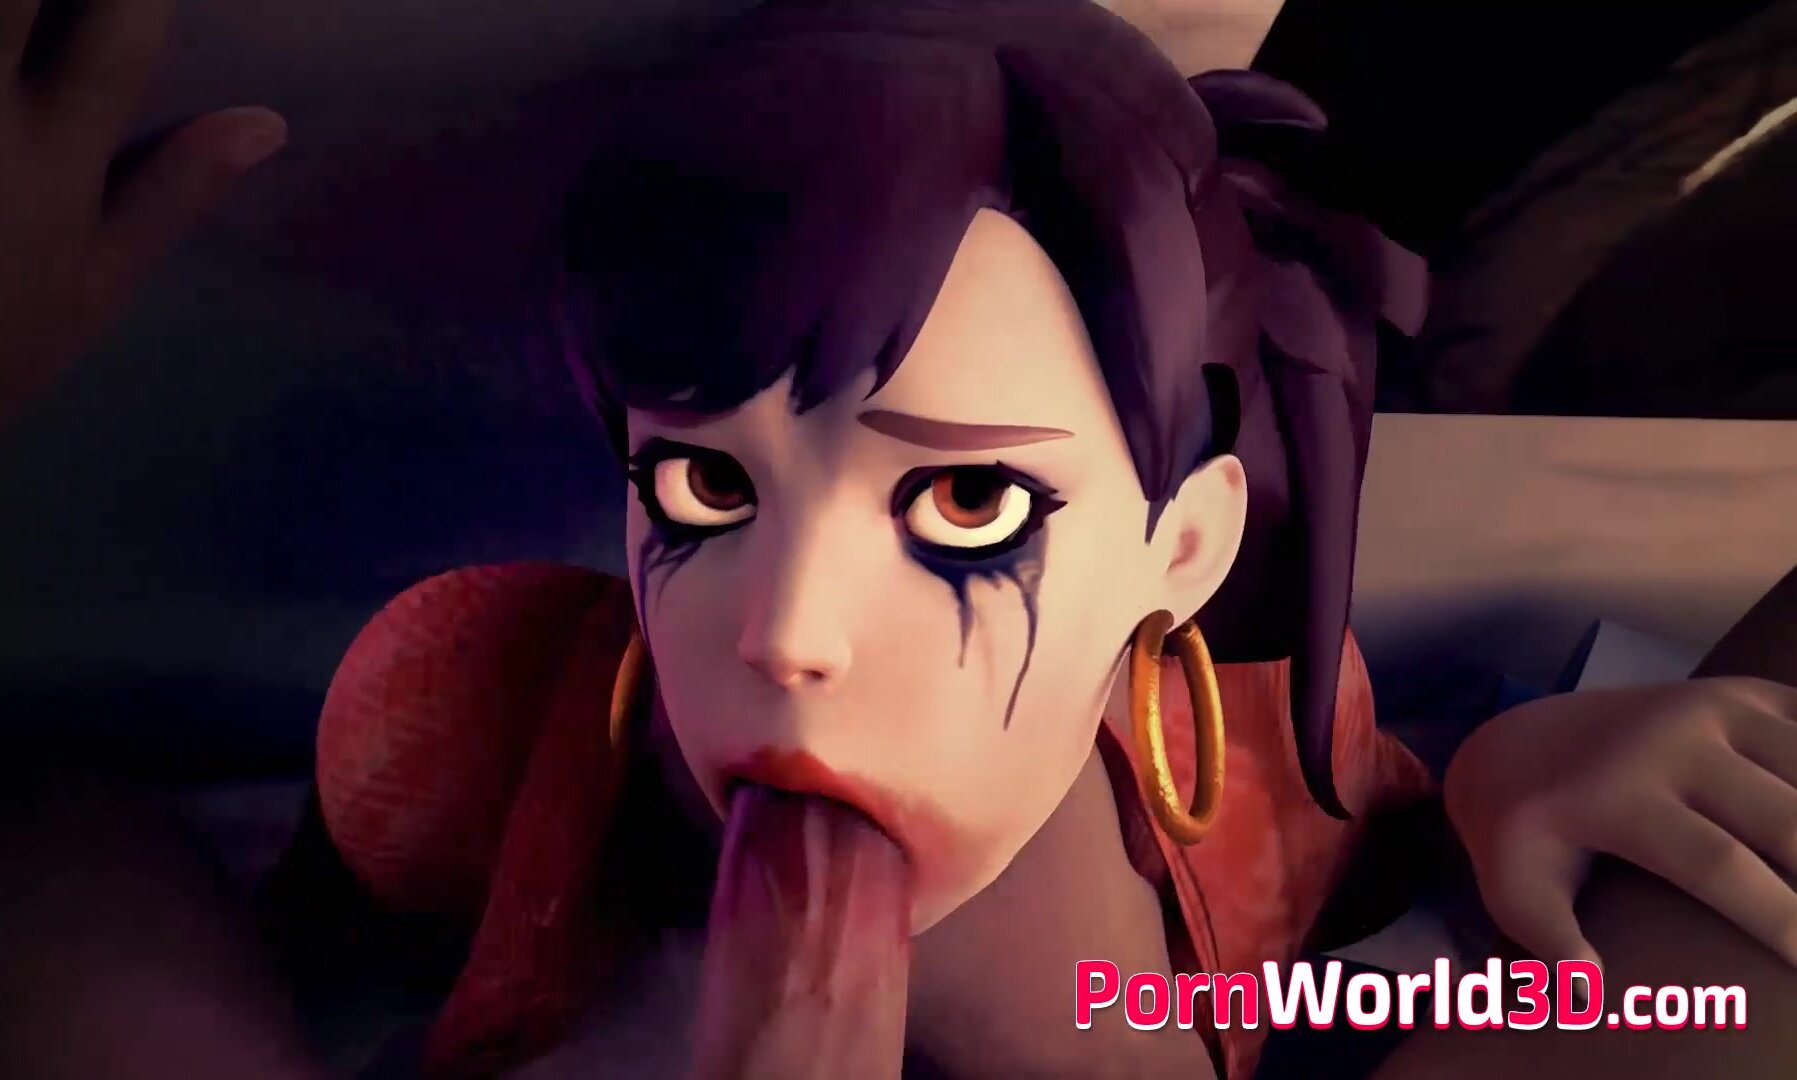 DVa Gets a Big Fat Cock in Her Little Mouth